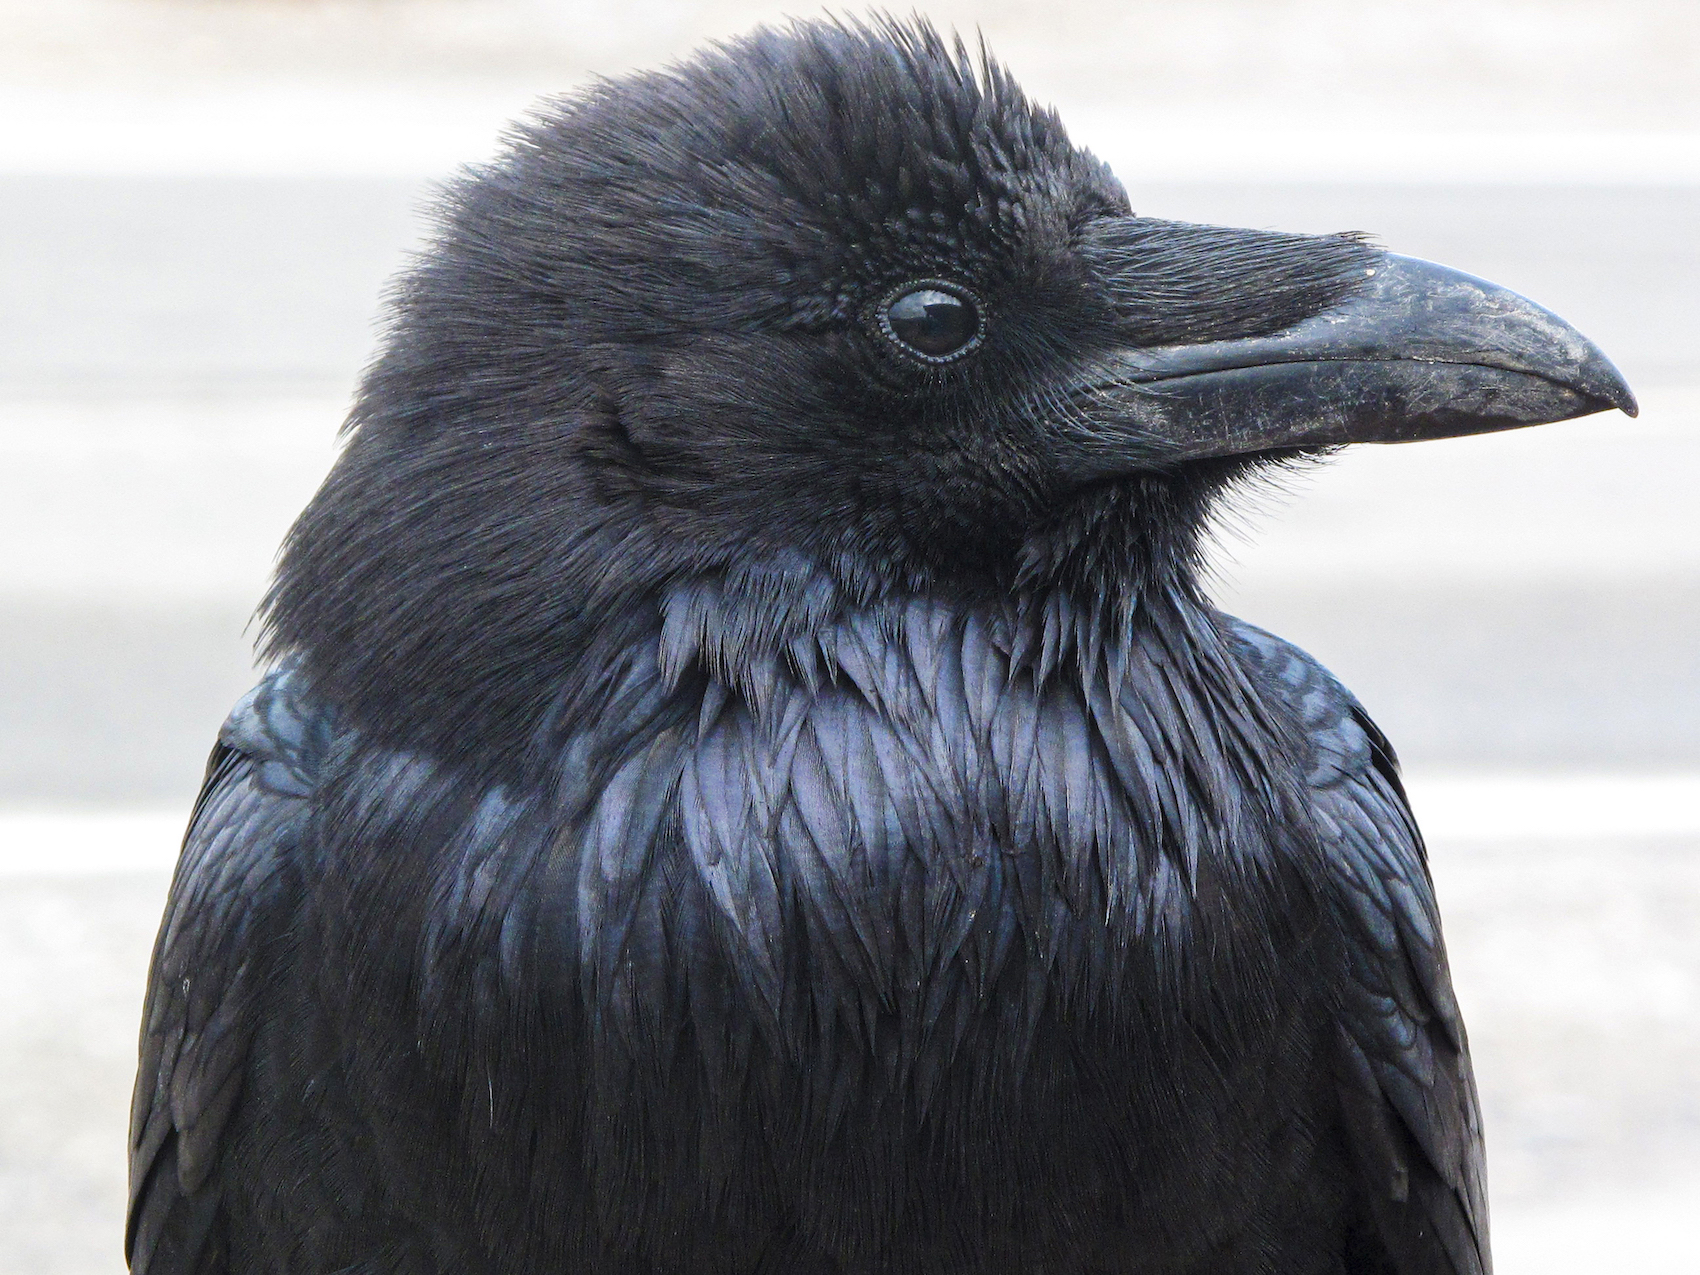 A raven's head is seen in a side profile with a white background.